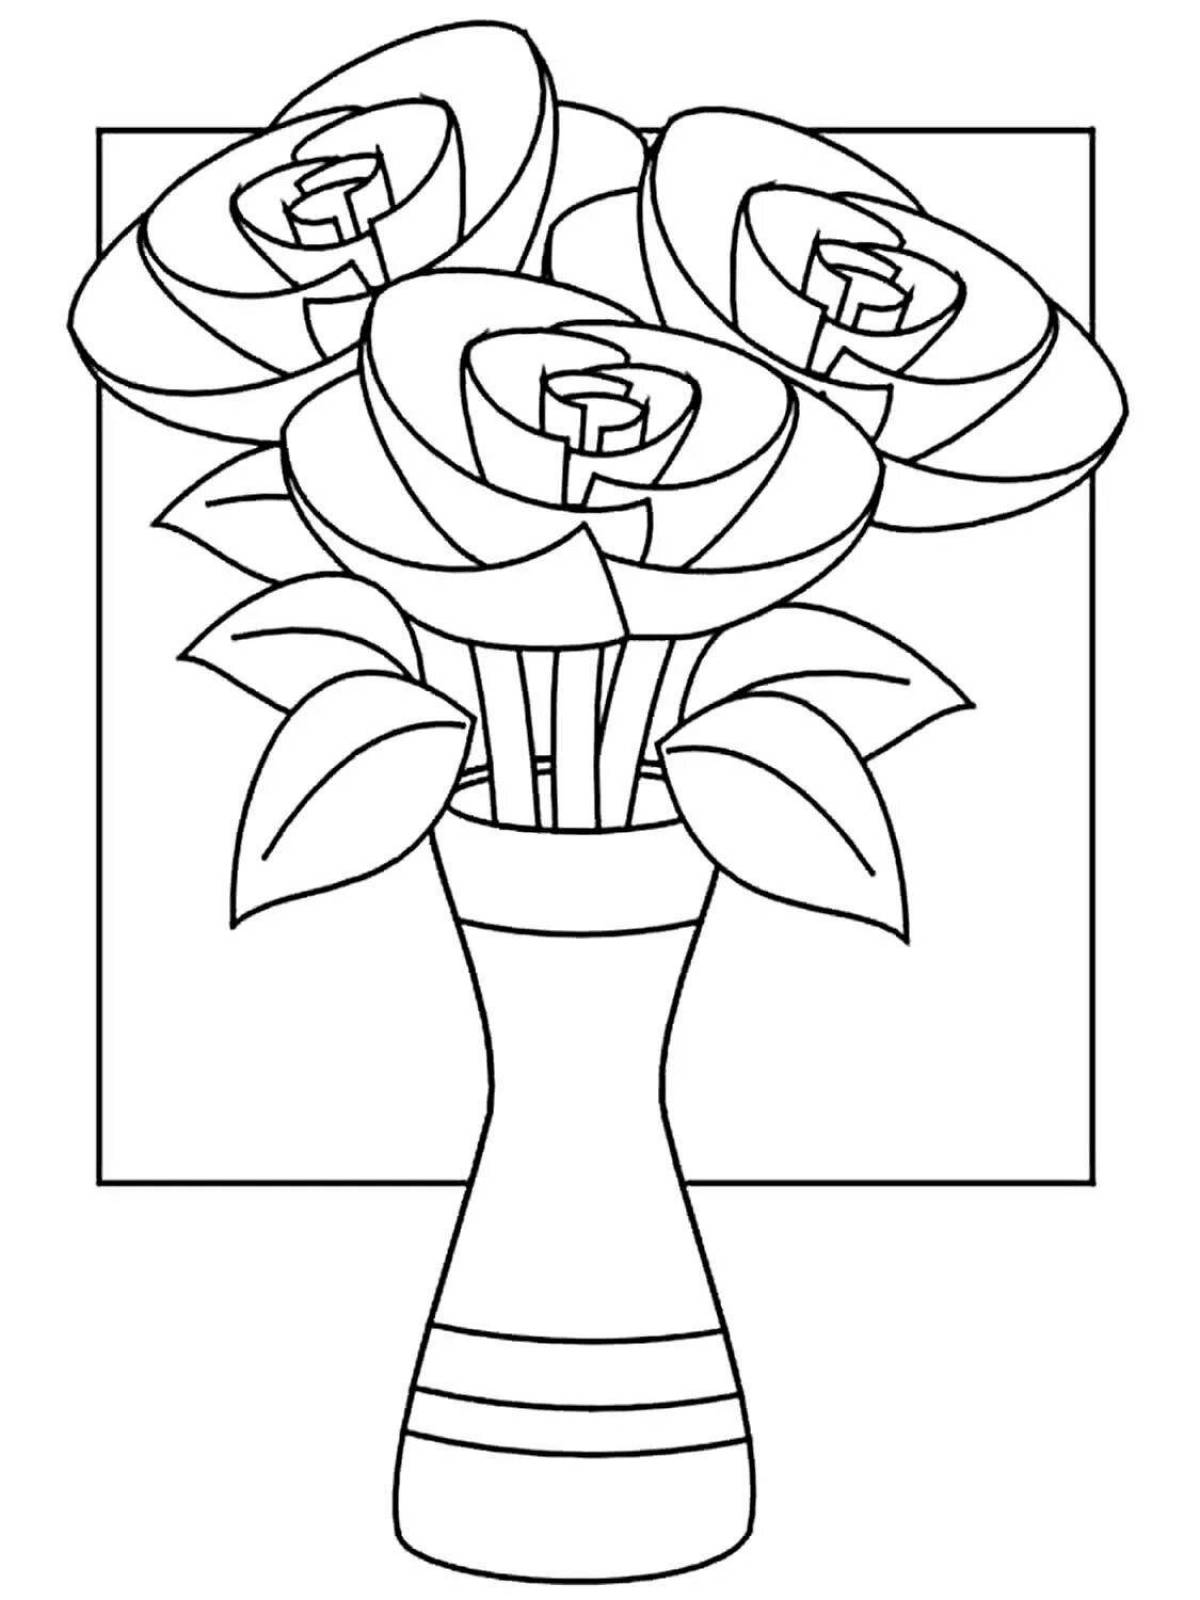 Coloring vase with flowers for children